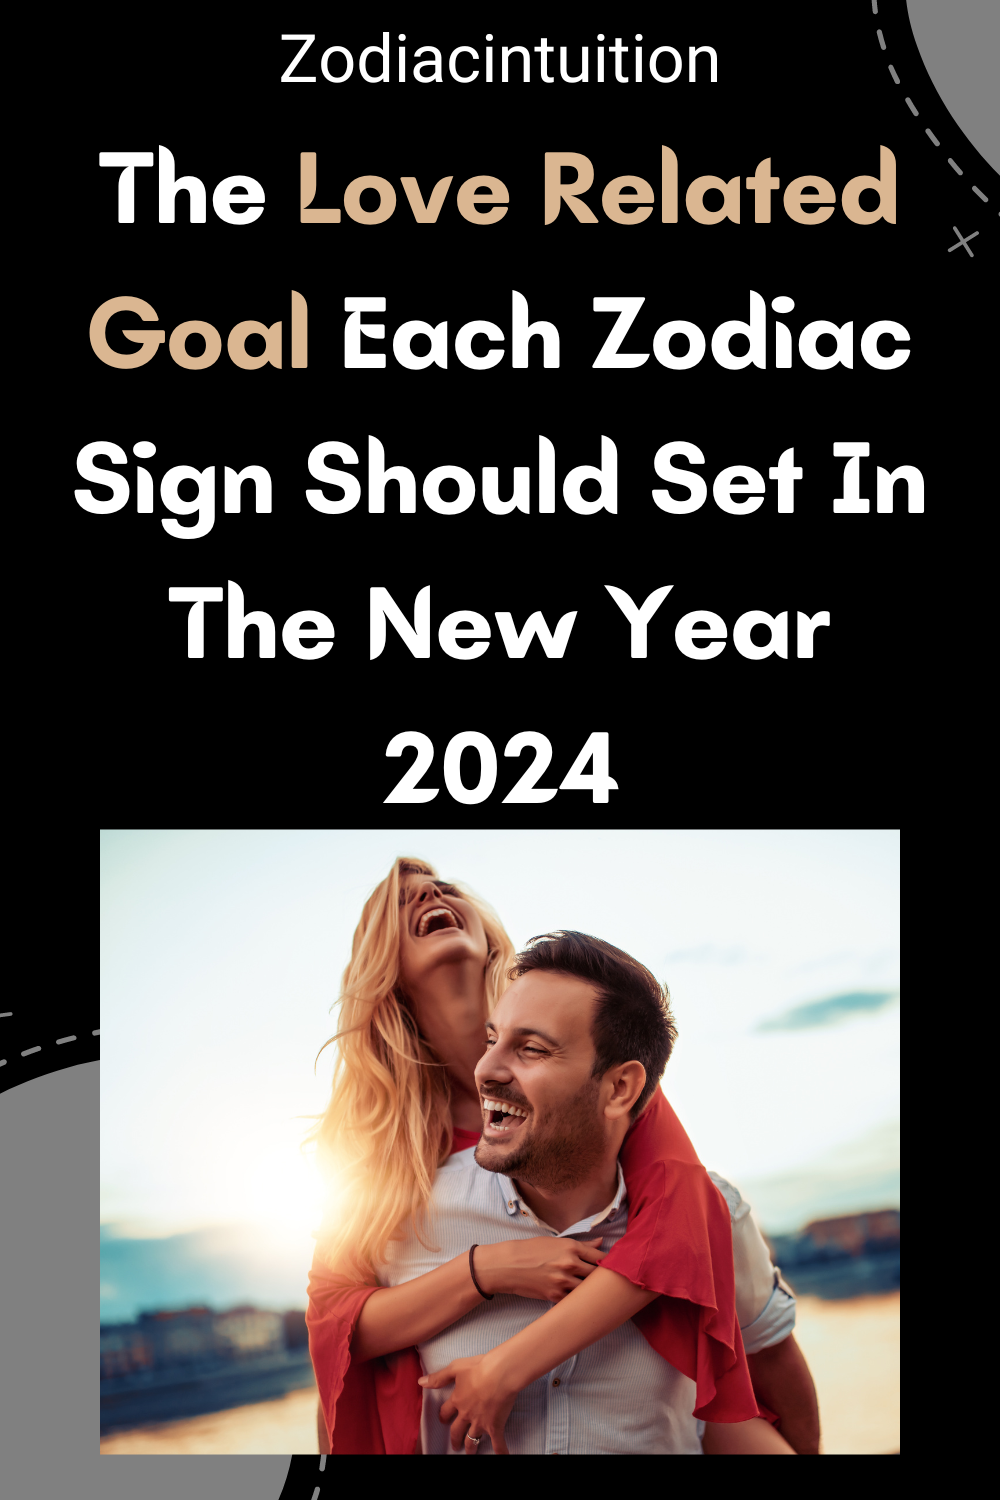 The Love Related Goal Each Zodiac Sign Should Set In The New Year 2024